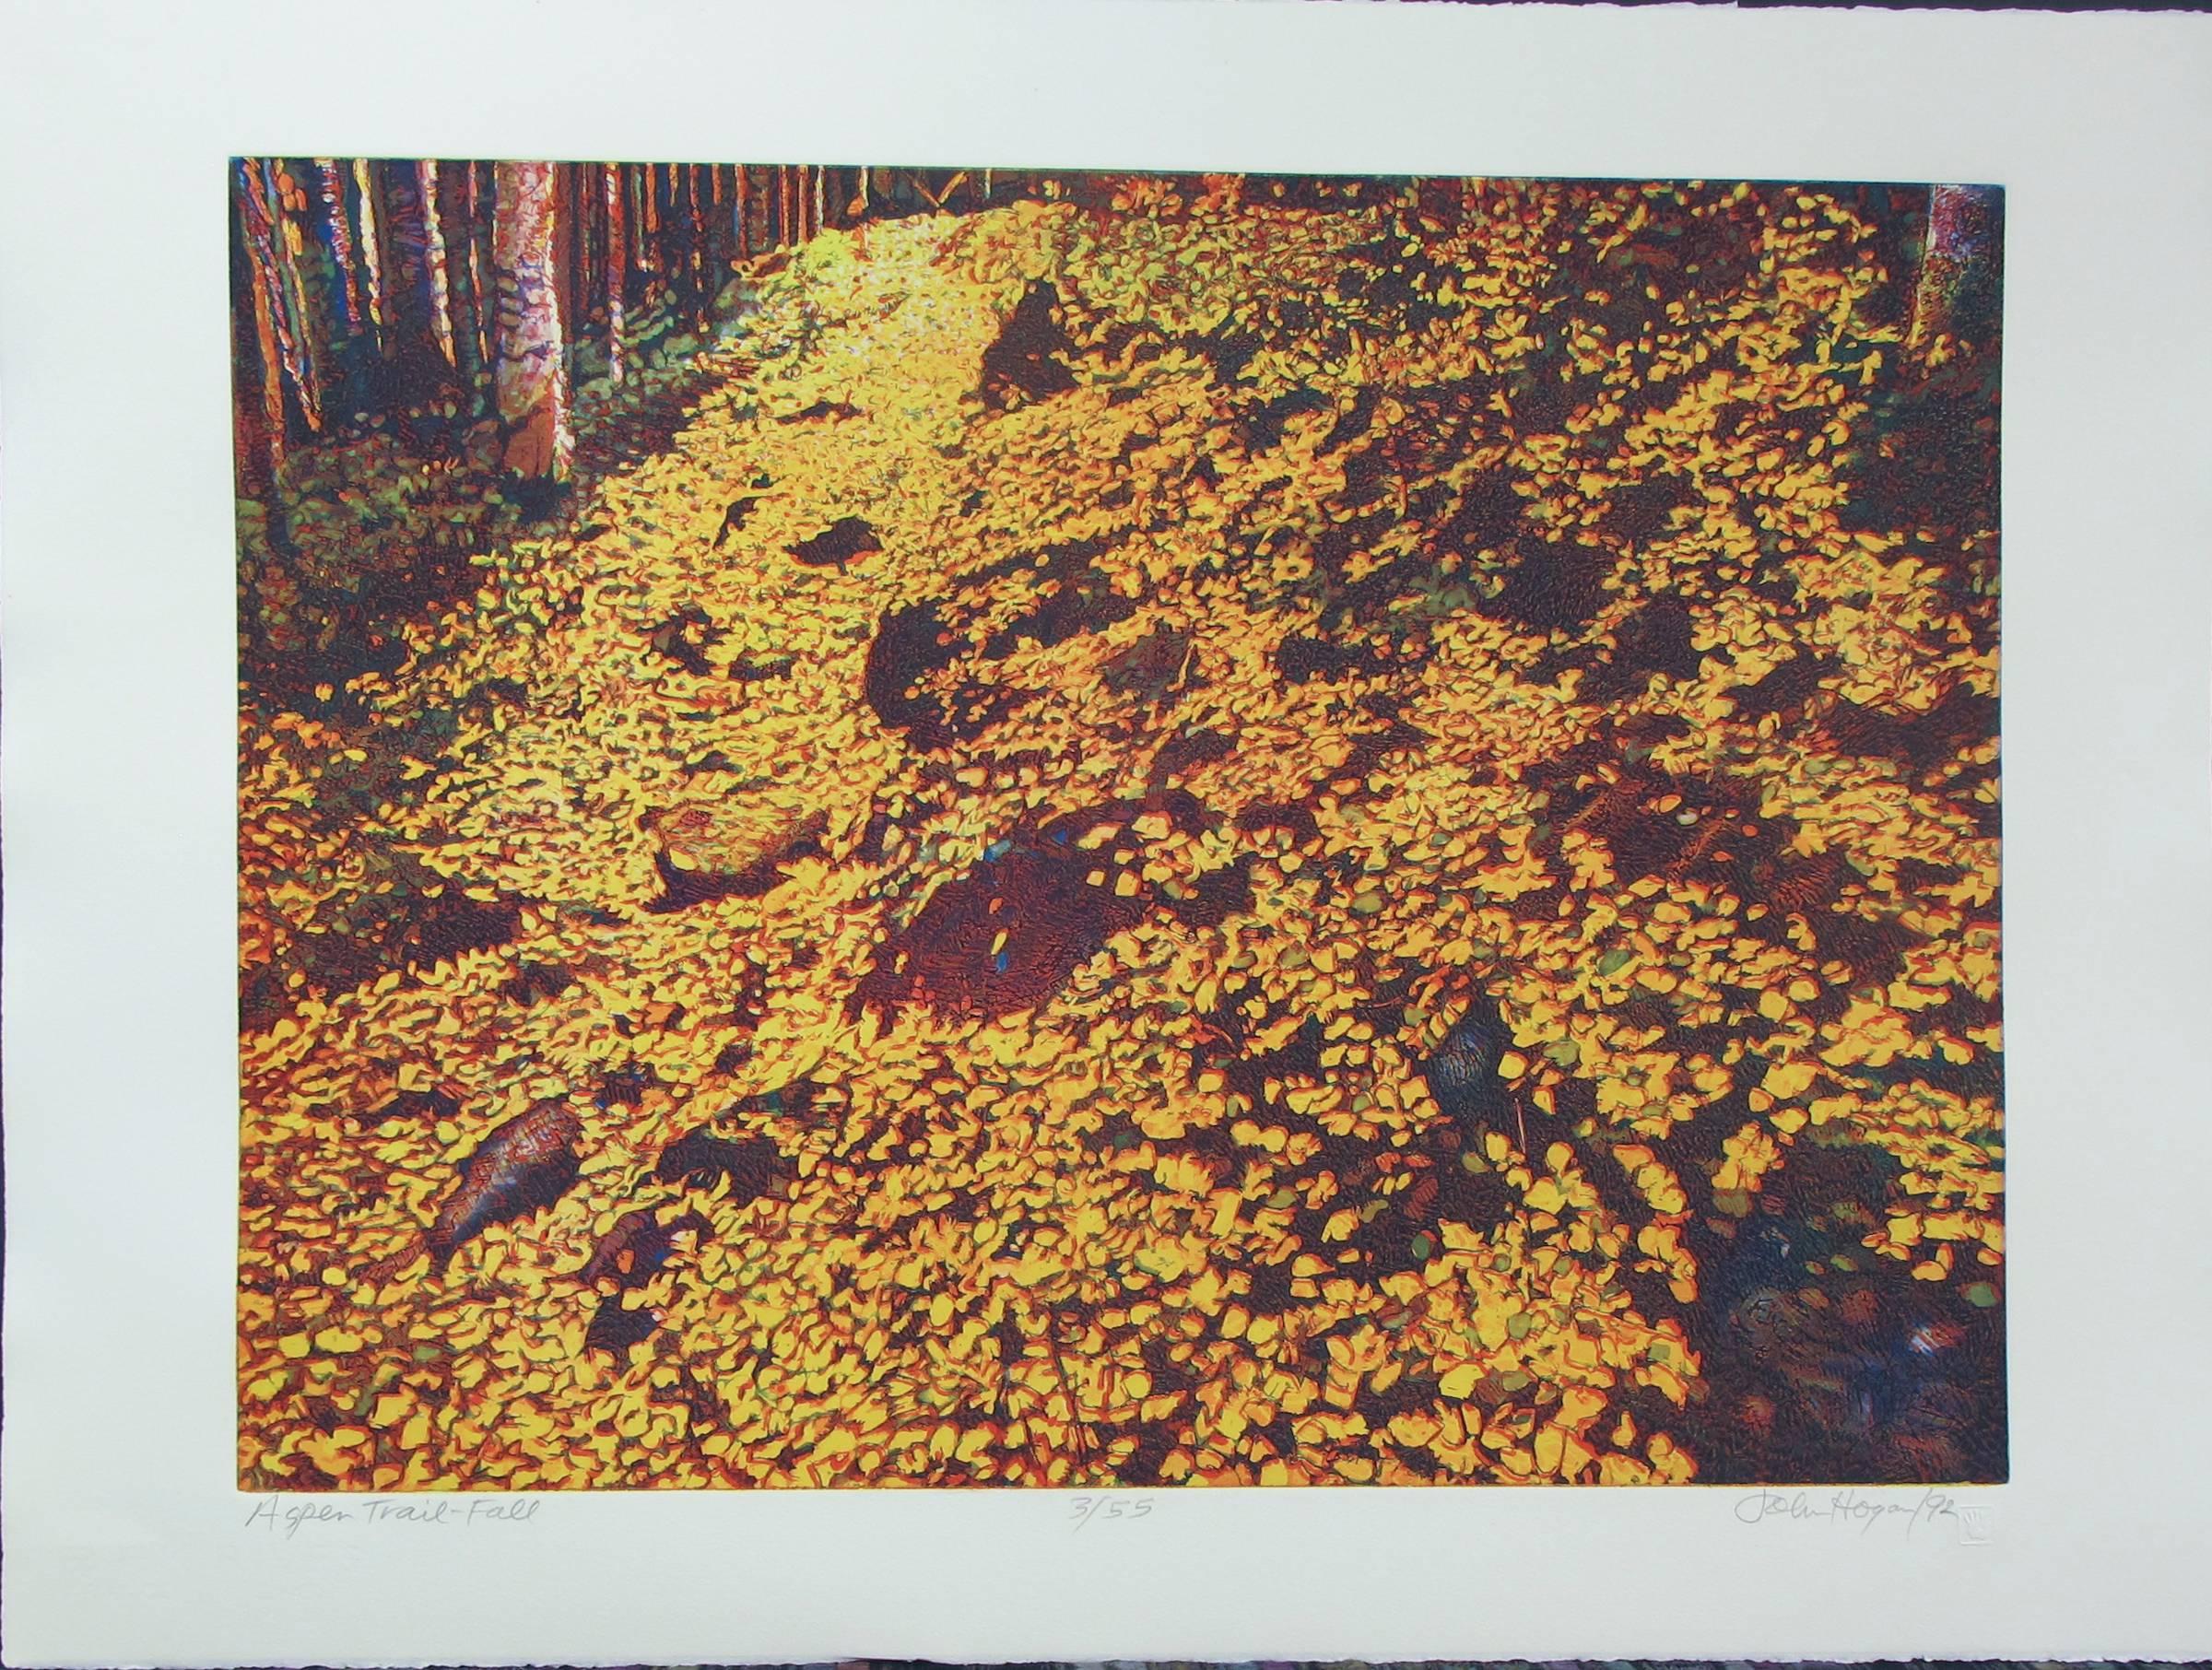 Aspen Trail- Fall, color etching,John Hogan, yellows, gold, landscape forest
hand pulled limited edition color etching 
22 x 30 paper size
18 x 24 image size
unframed
edition signed and numbered by the artist